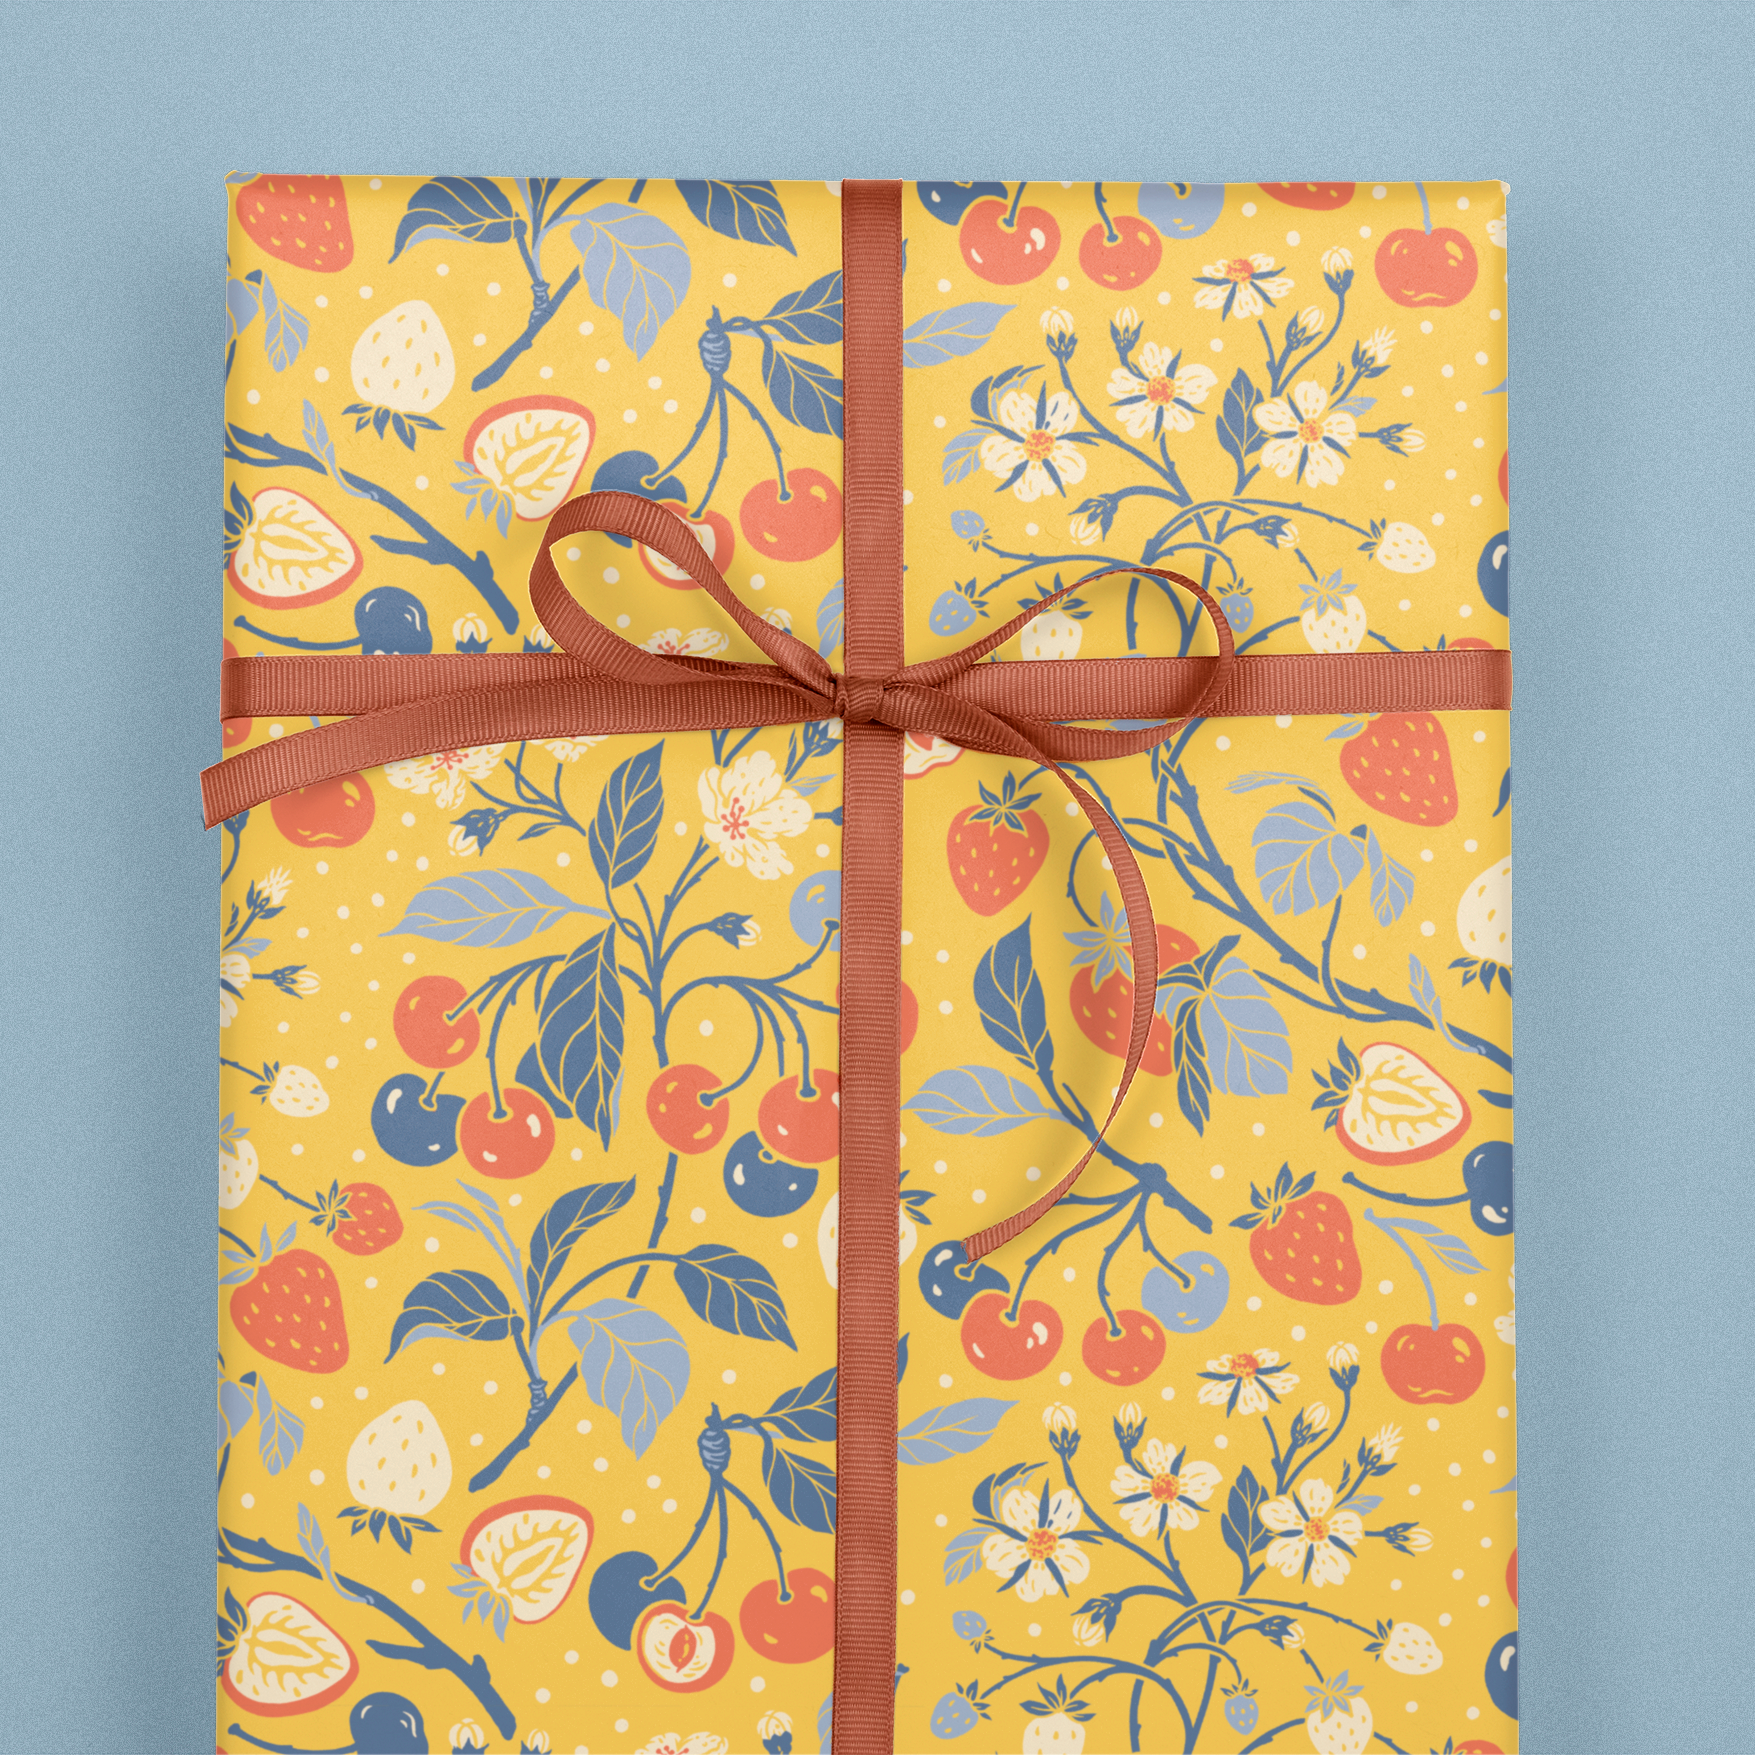 Recyclable Gift Wrap / Wrapping Paper: Strawberries